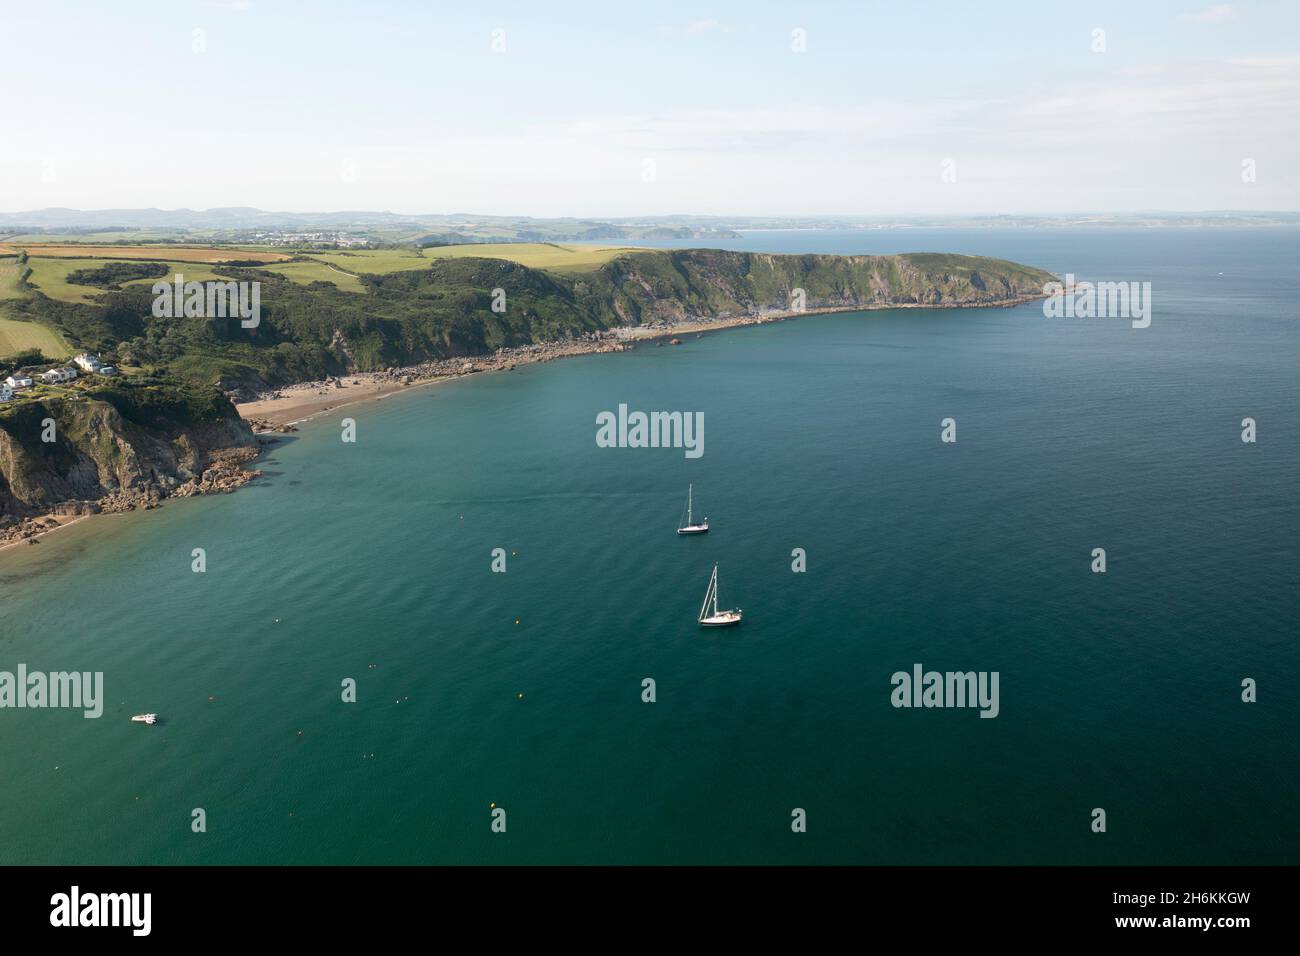 The Cornish coastline from Gorran Haven showing yachts in the calm sea Stock Photo